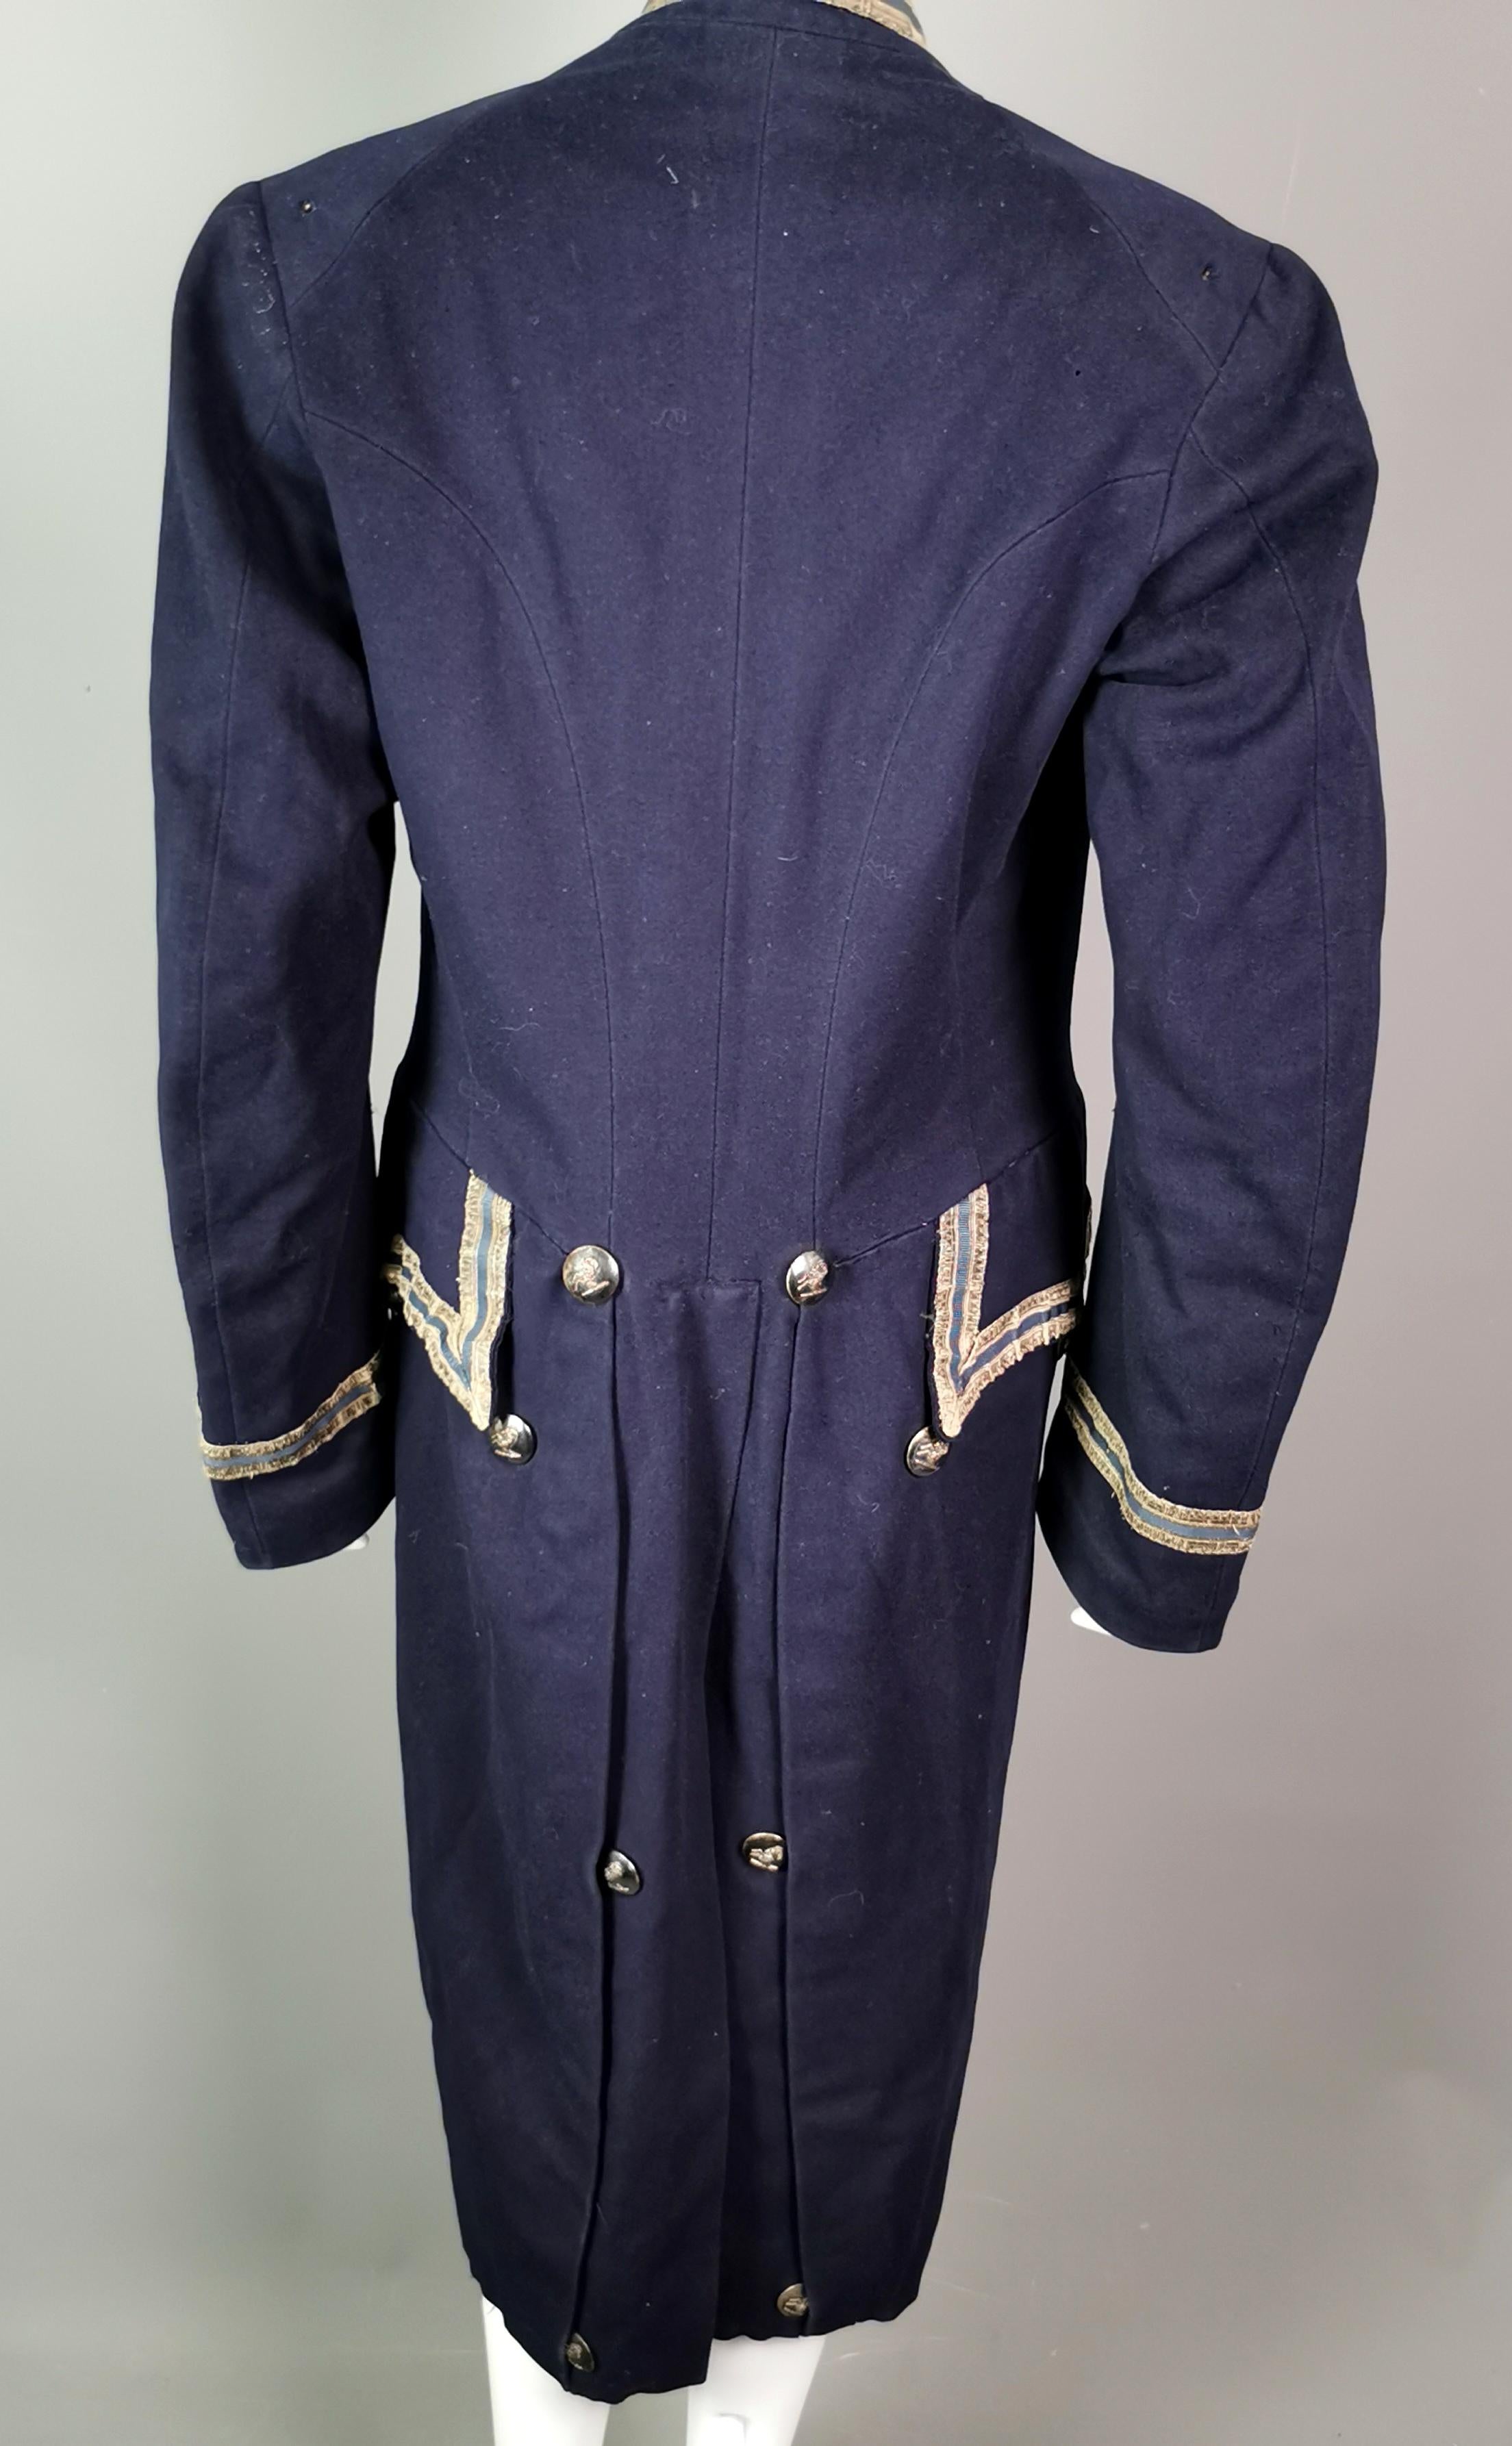 Antique theatrical costume, 18th century military style frock coat, Edwardian  7